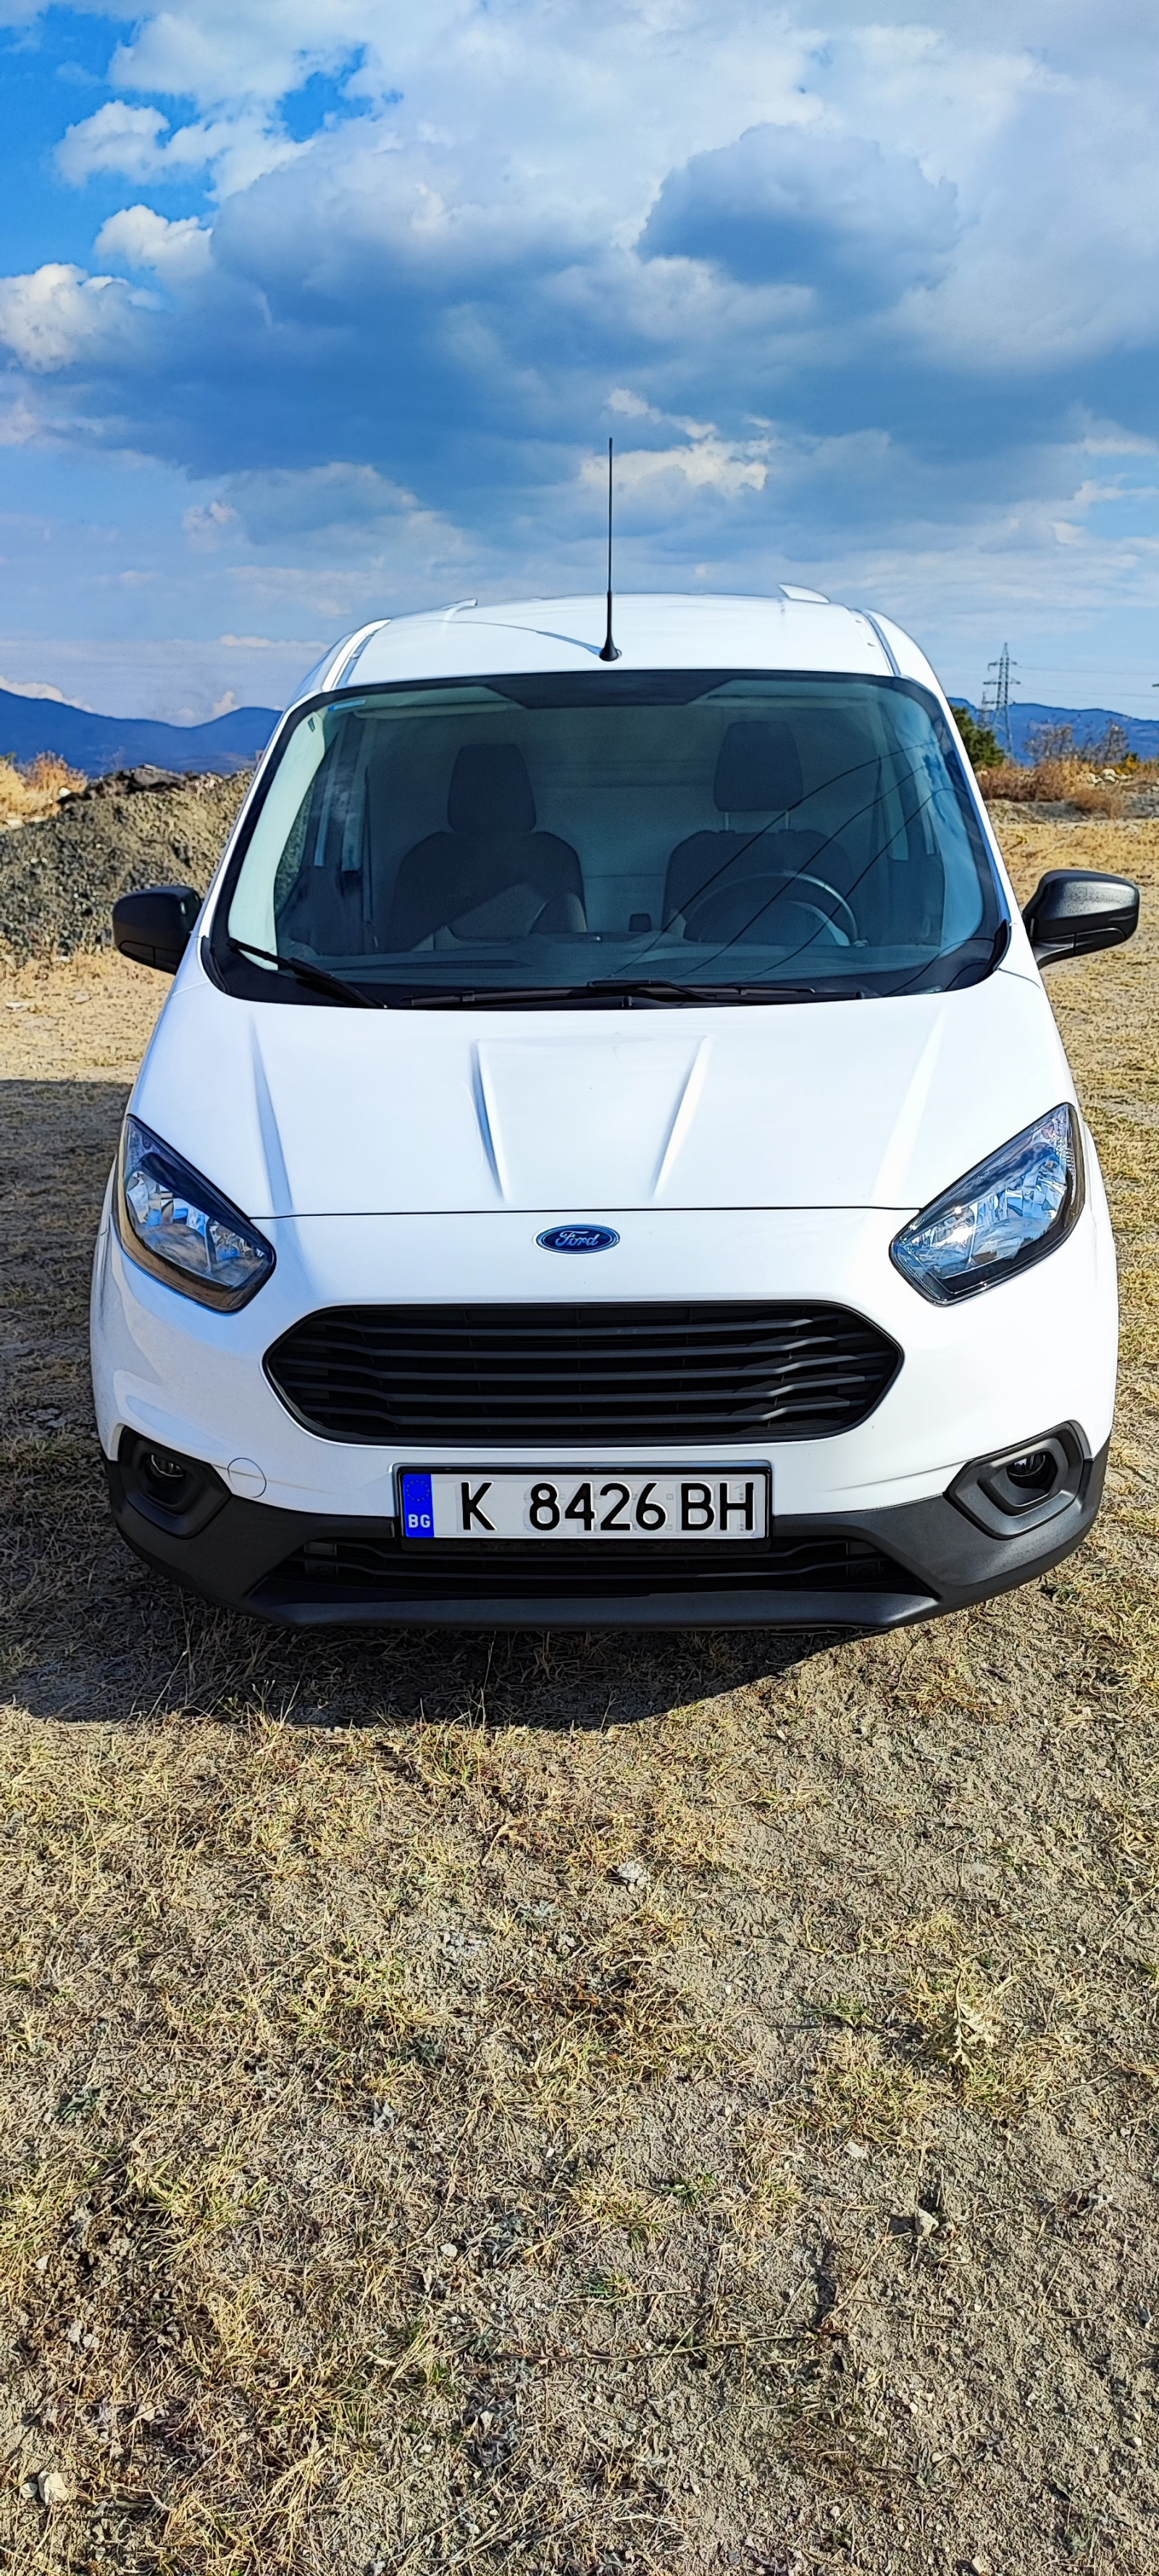 Ford Courier Transit Courier 1.5 TDCI Trend - изображение 1